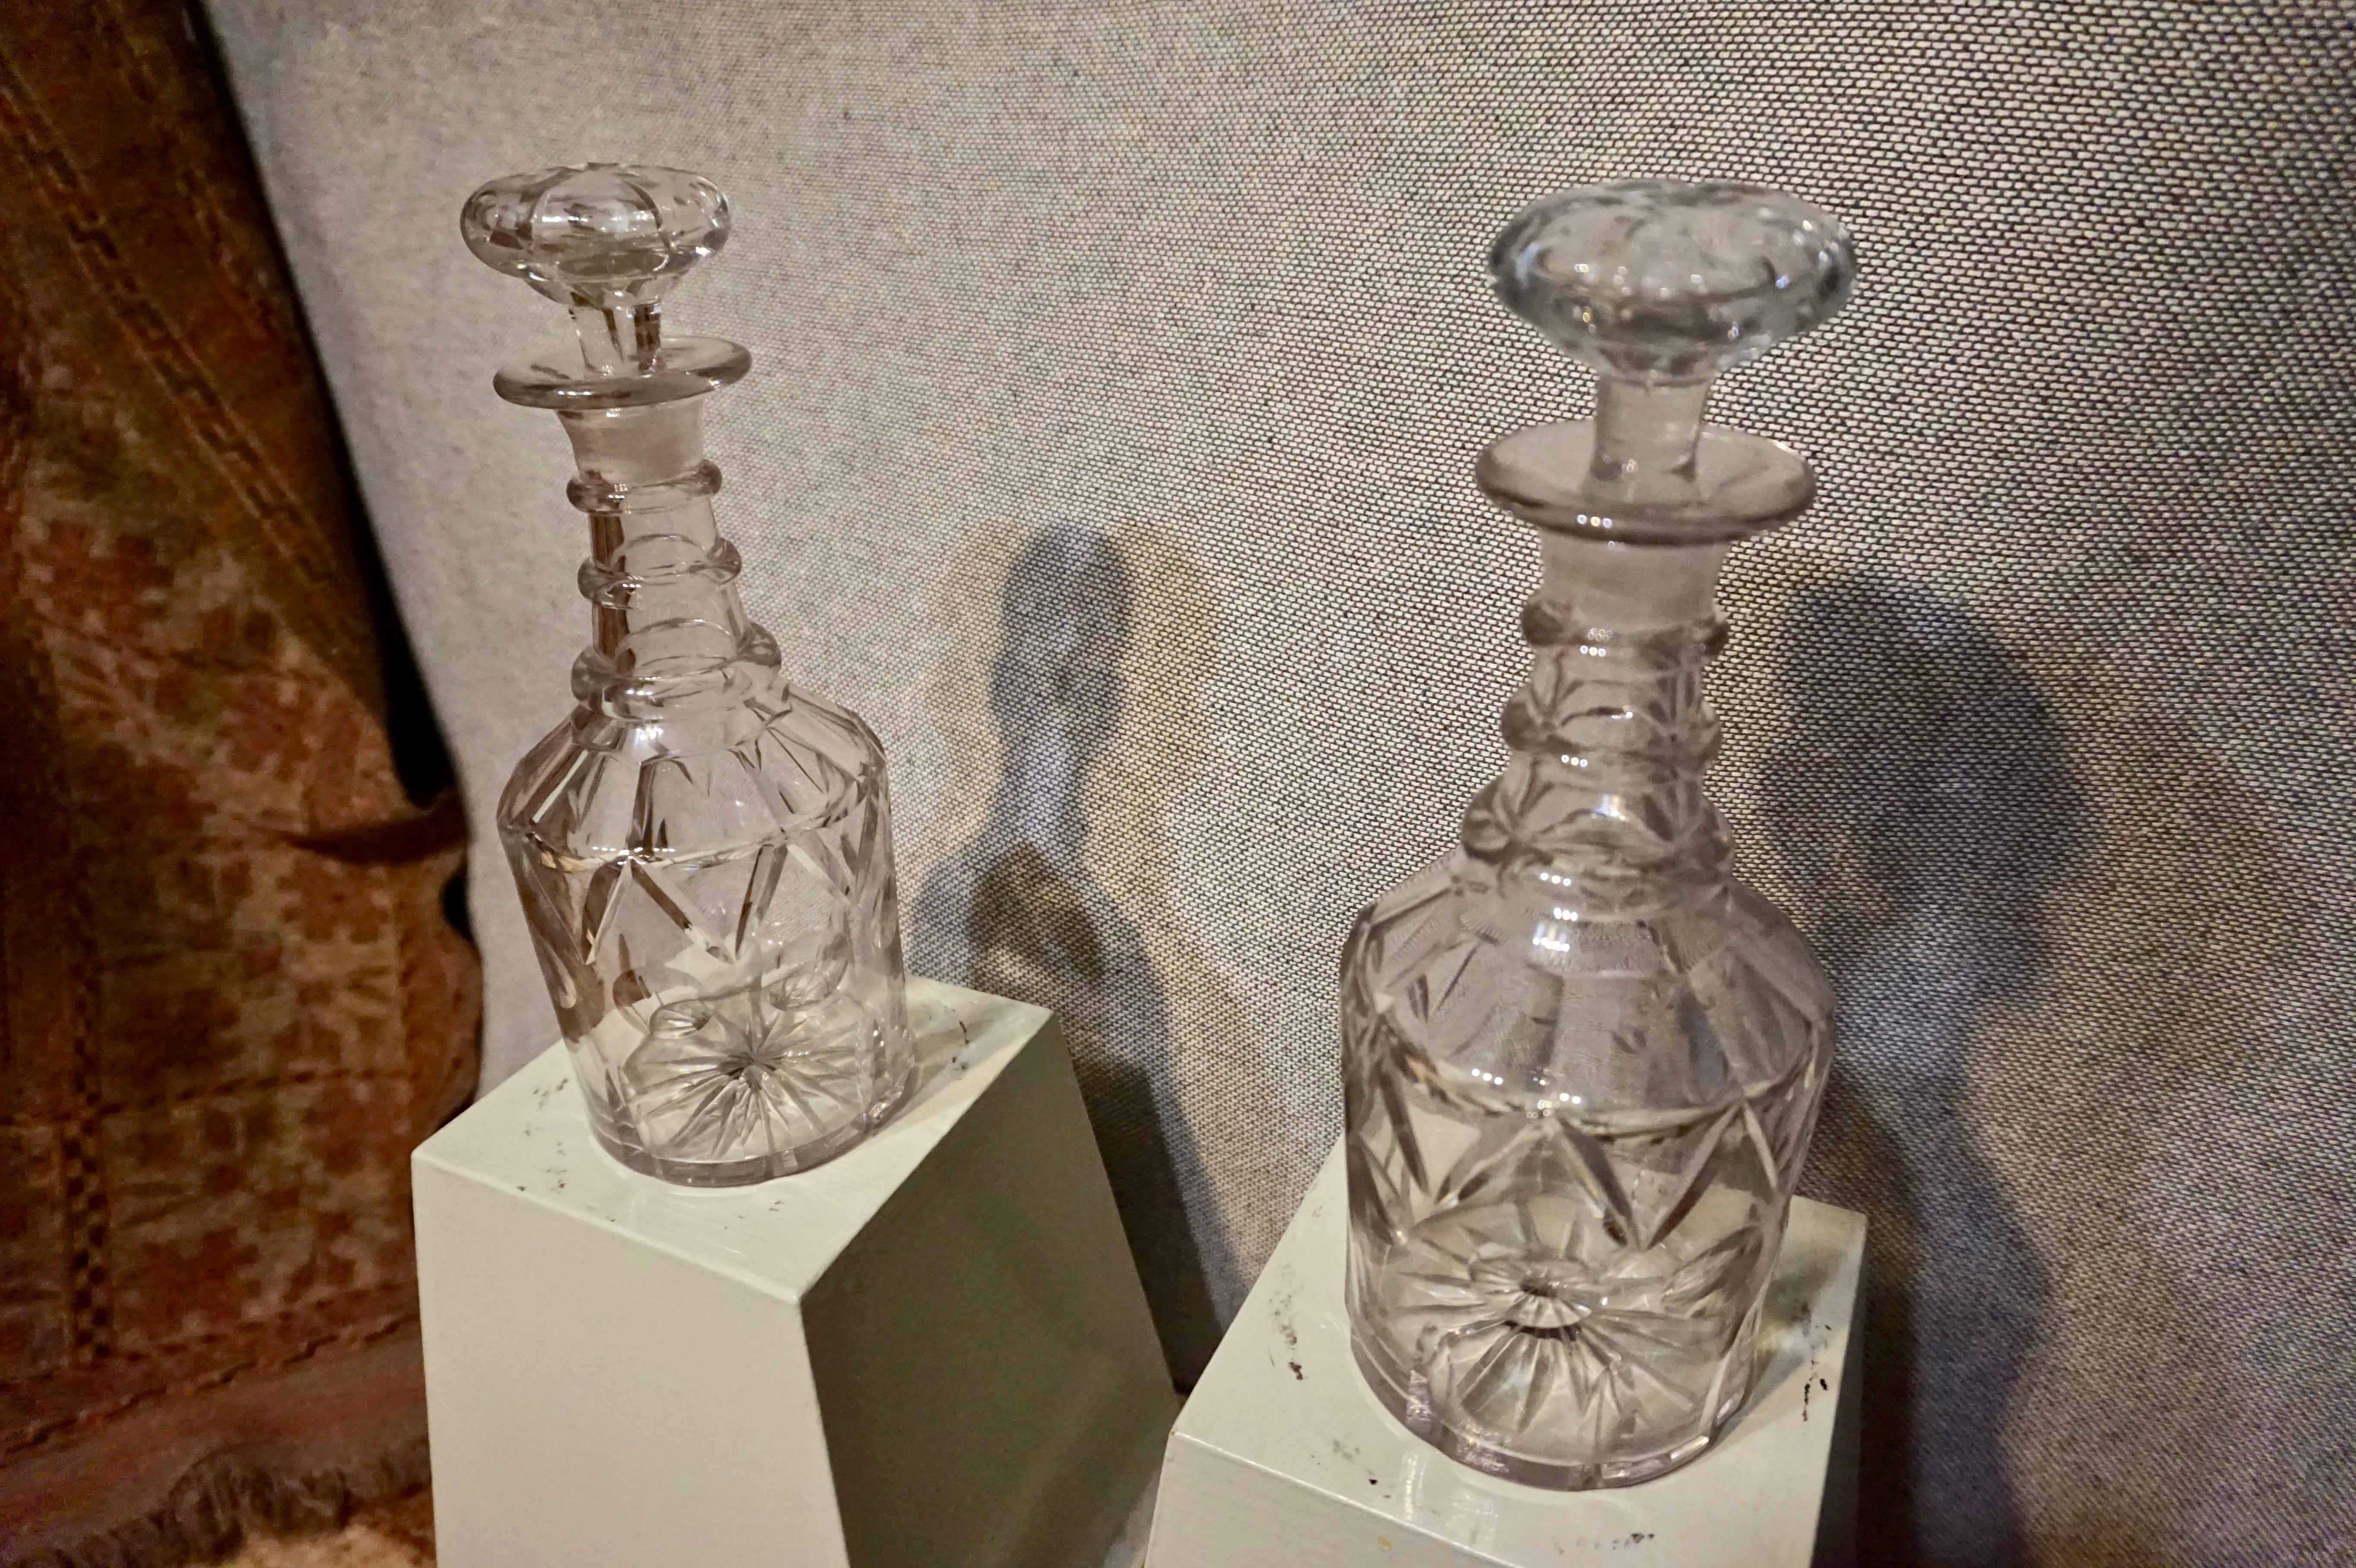 English Pair of Three Ringed Distinguished Georgian Cut Glass Decanters